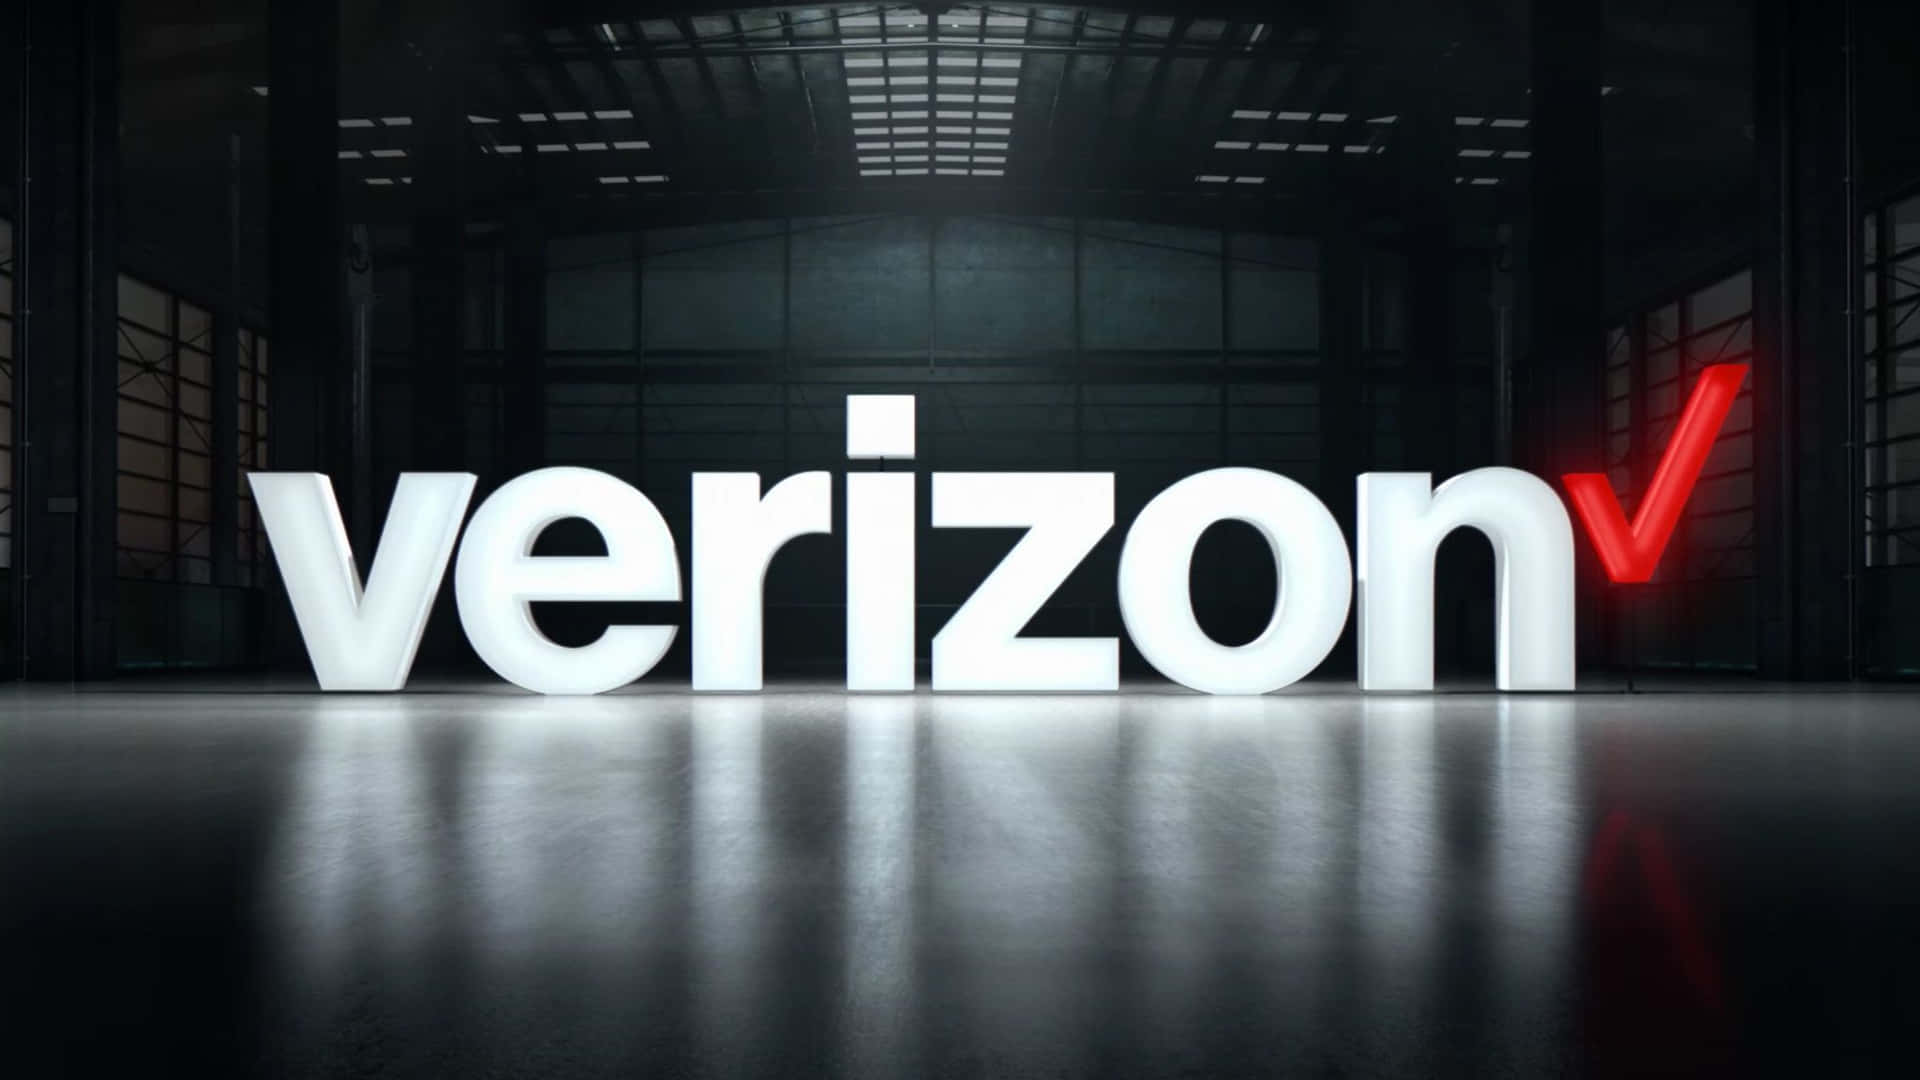 Living up to Verizon's best-in-class reputation